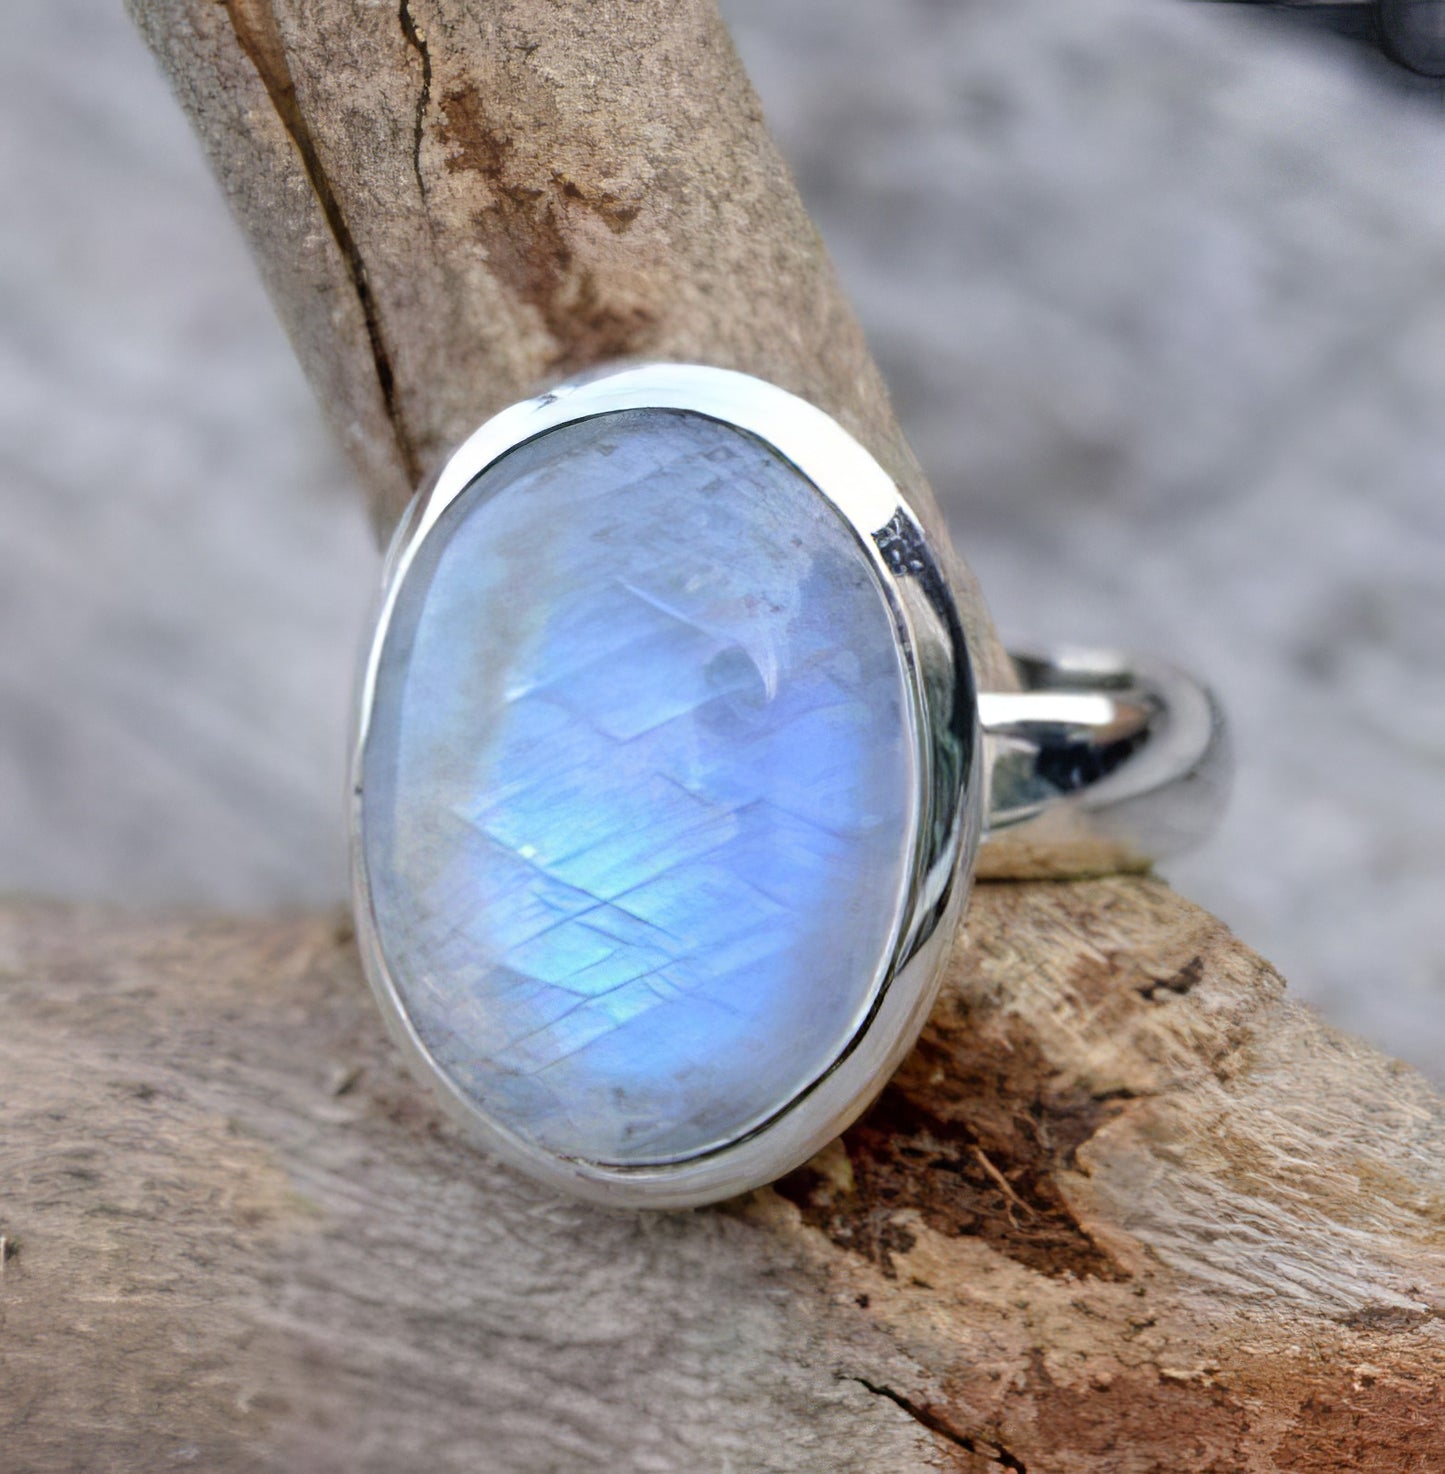 Vintage Moonstone Ring in Silver Sizes 8